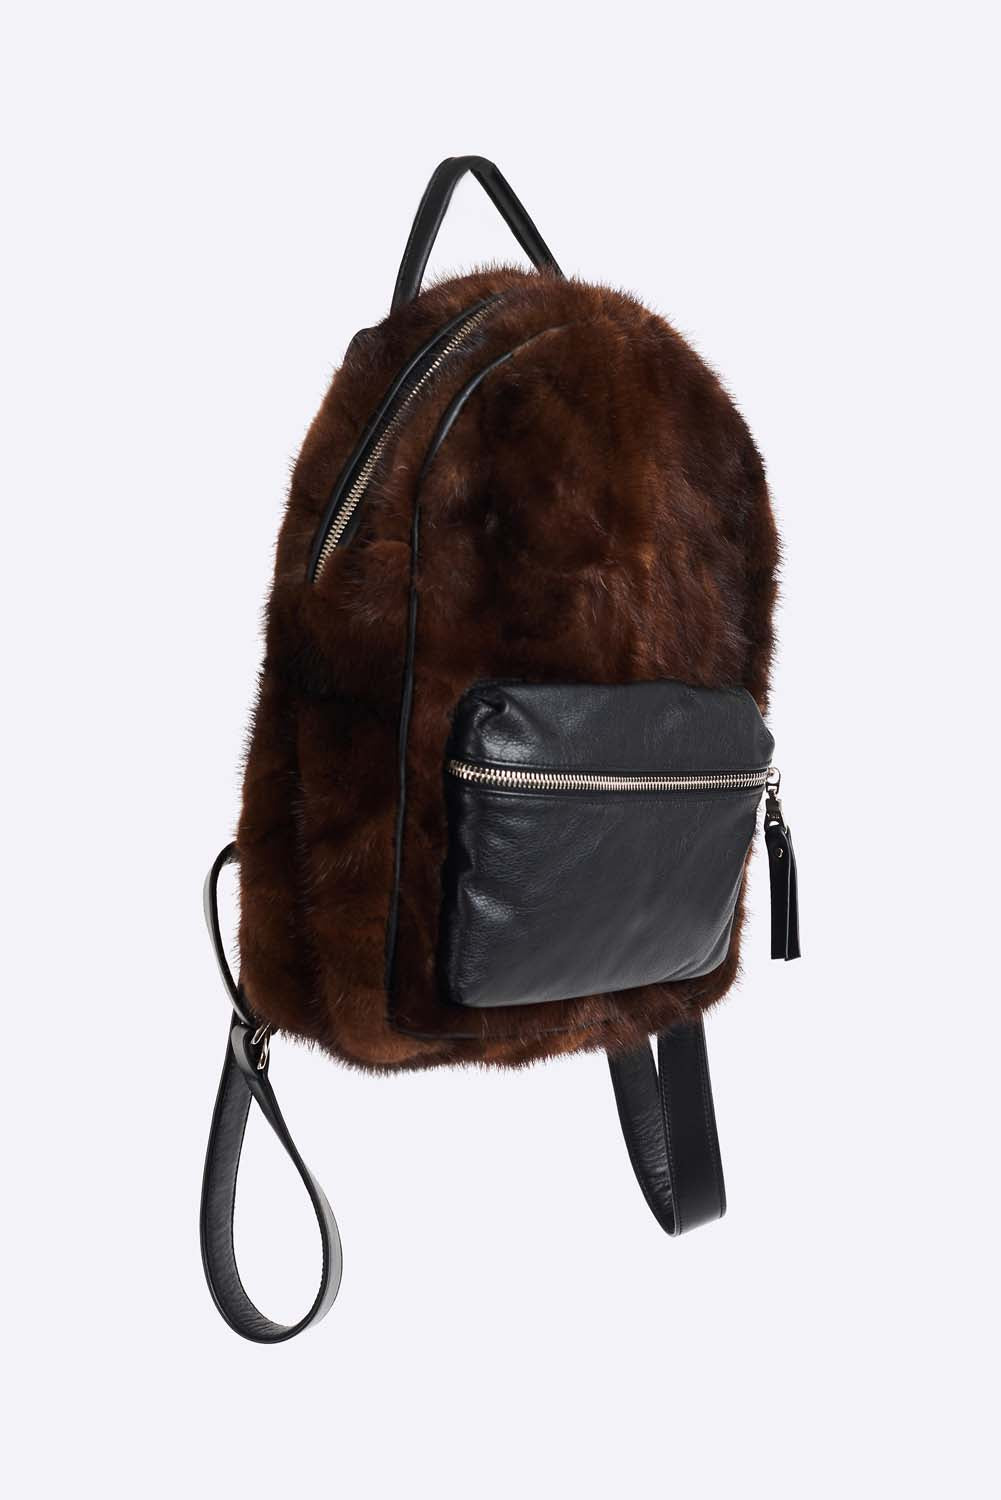 Upcycled mink fur mini backpack. Front leather zip pocket and adjustable backpack straps. Single leather handle and polyester lining. Leather trim and hand polished zipper (Excella). Hand made in Montreal. 